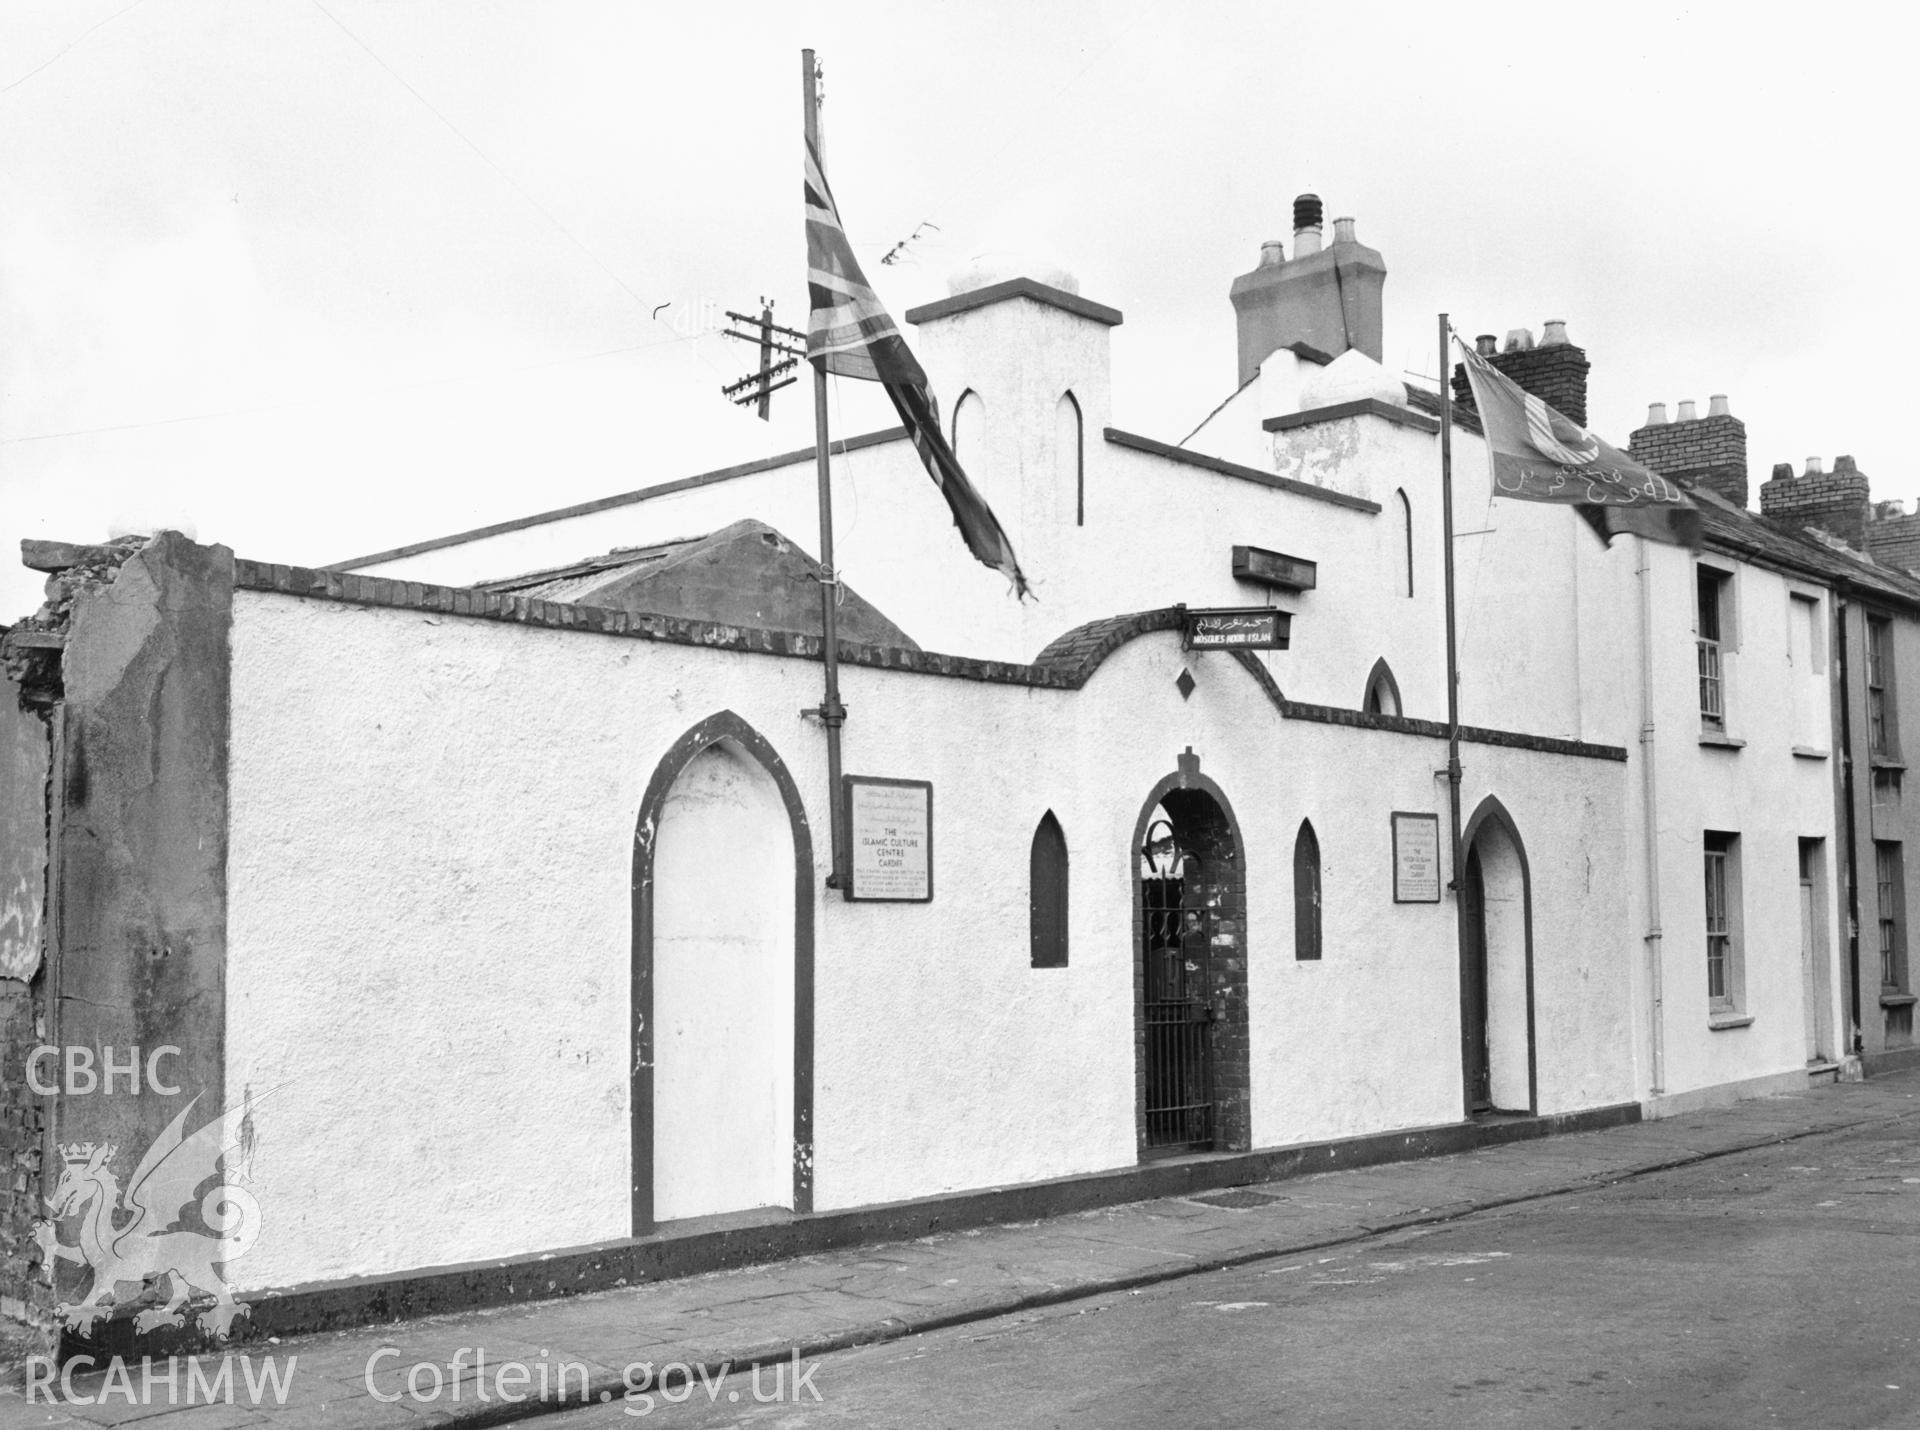 View of Peel Street Mosque, Cardiff, taken in 1964. Built in 1947, this was the first purpose-built mosque in Wales established by the sea-faring Yemeni community which settled around Cardiff docks.  It was a white painted rendered building with a small dome and minarets, looked charming and traditional.